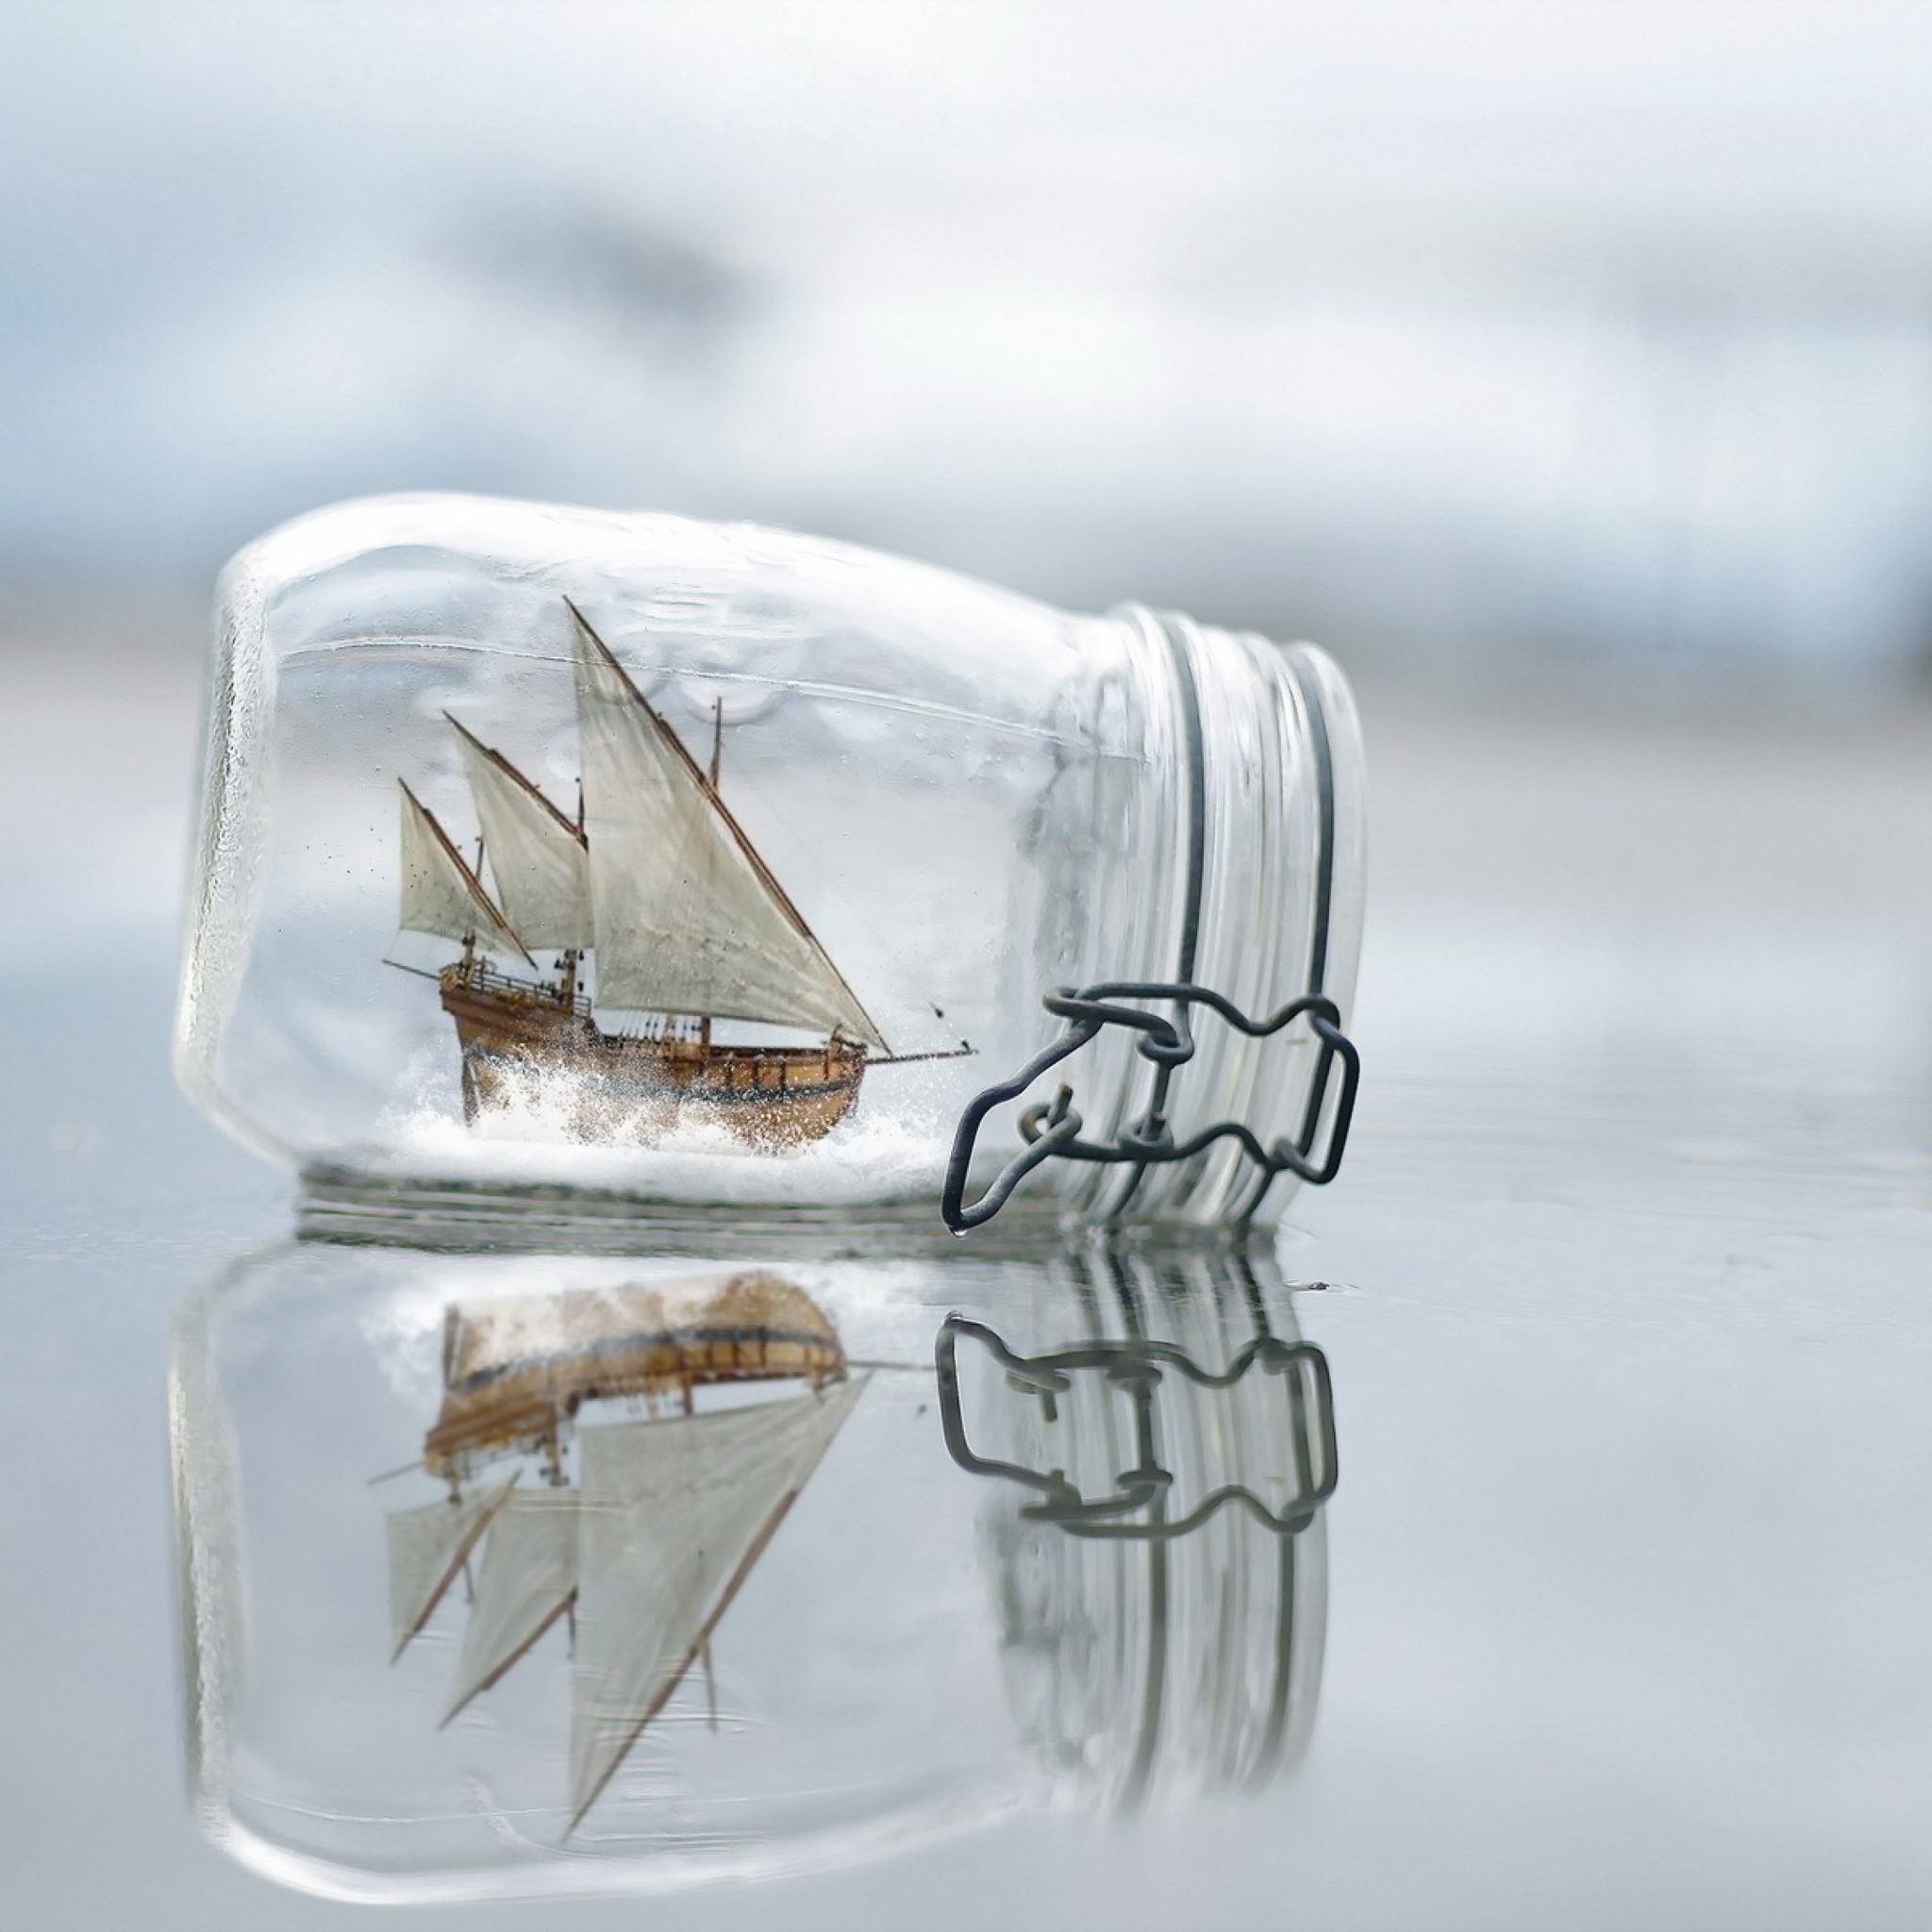 Обои Toy Ship In Bottle 2048x2048